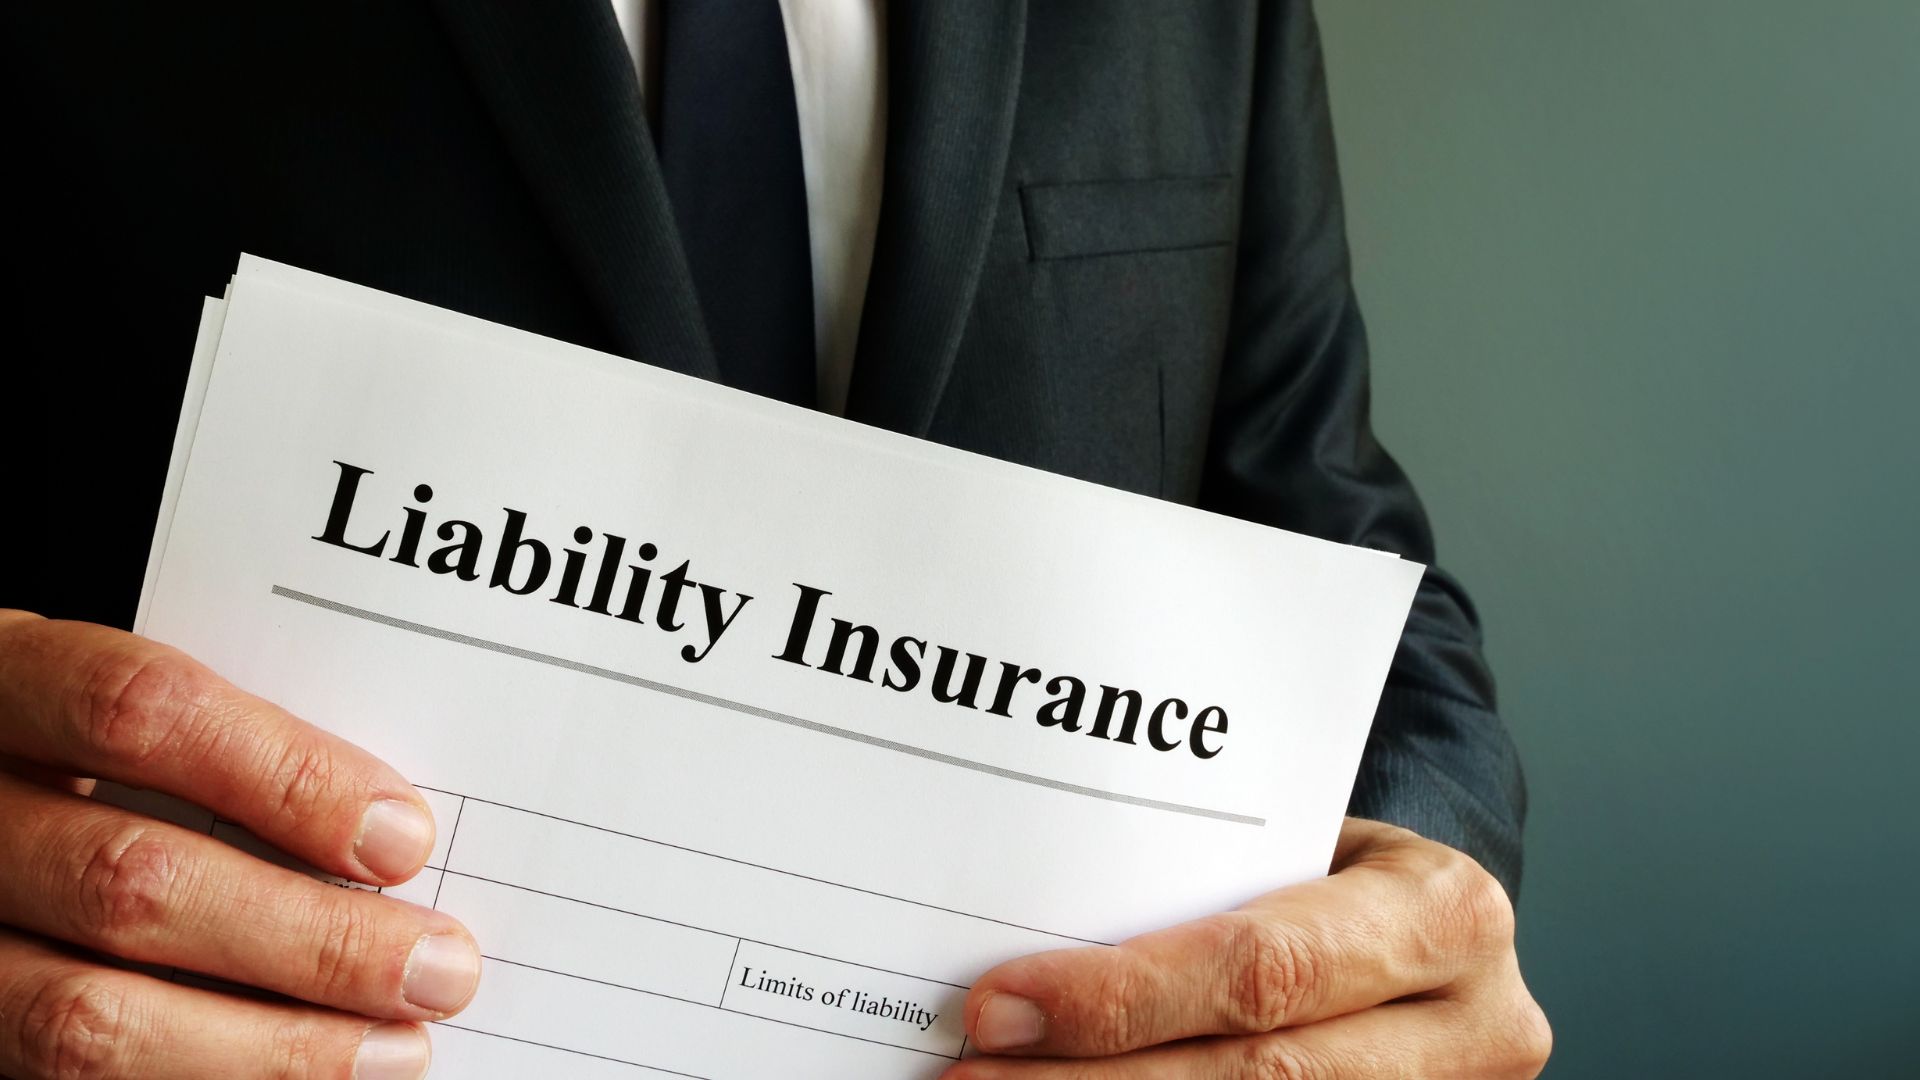 What Does Liability Insurance Cover?